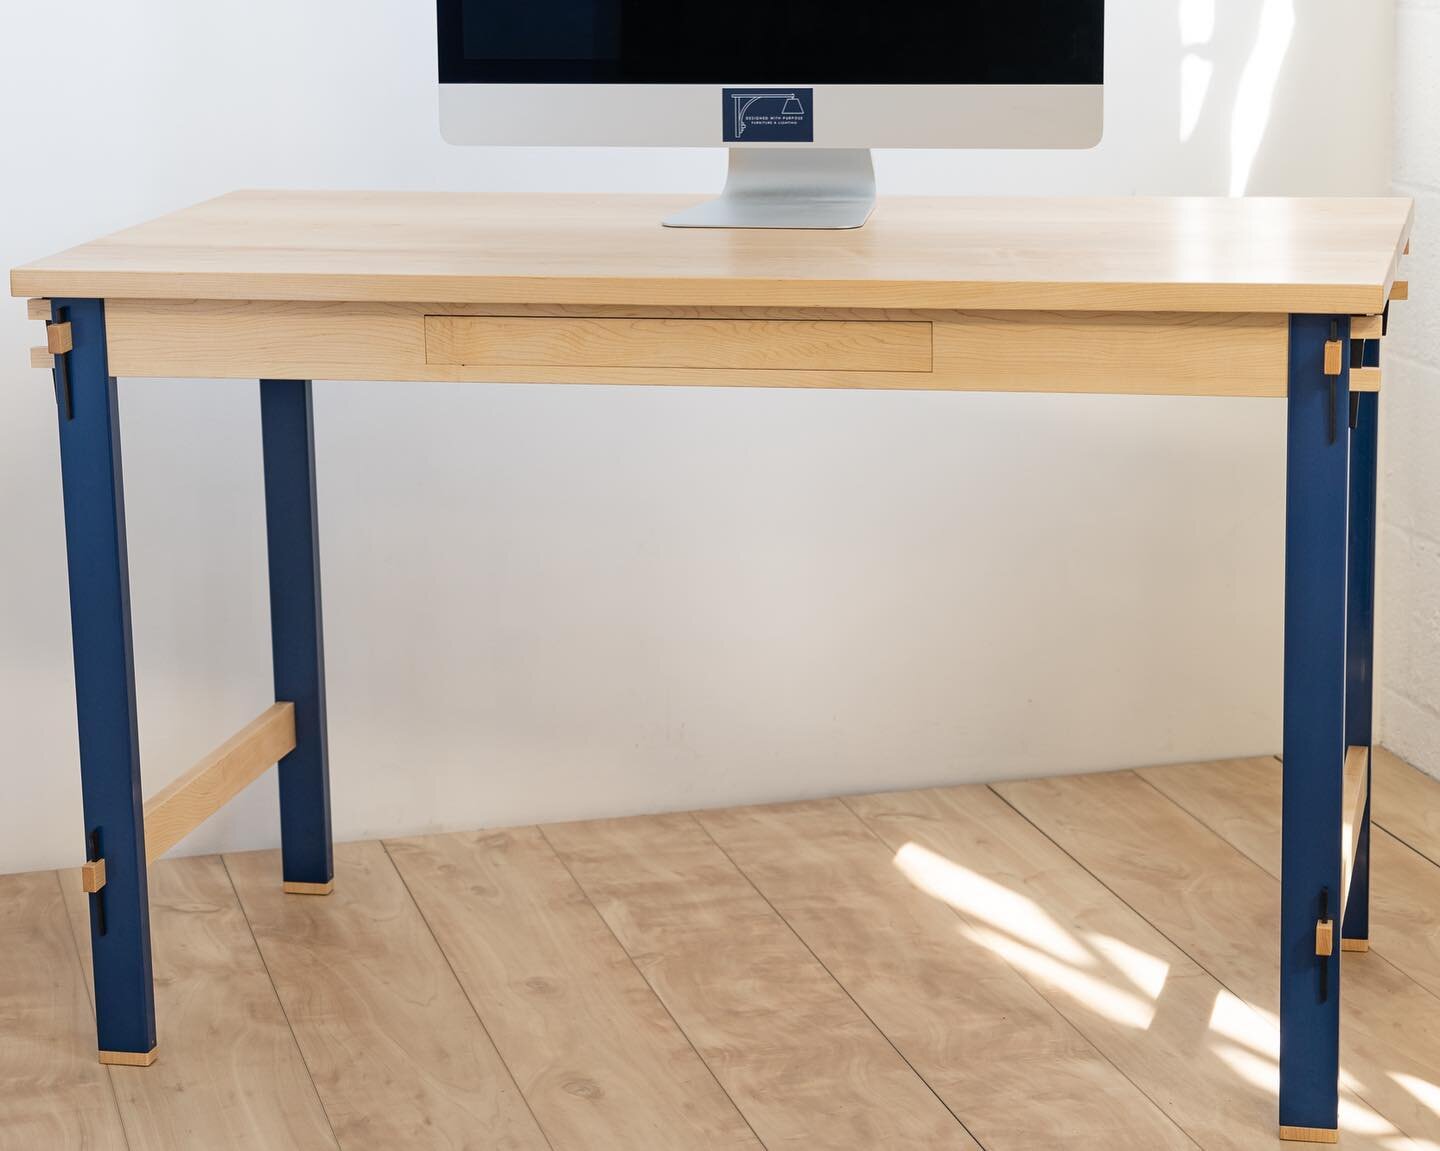 New Knock Down Tension Desk. This one features a slim drawer/ keyboard tray, thicker top, ebony wedges blue powder coated steel legs. Assembly video coming soon. Can be seen @millcollective in the October High Point Market show.